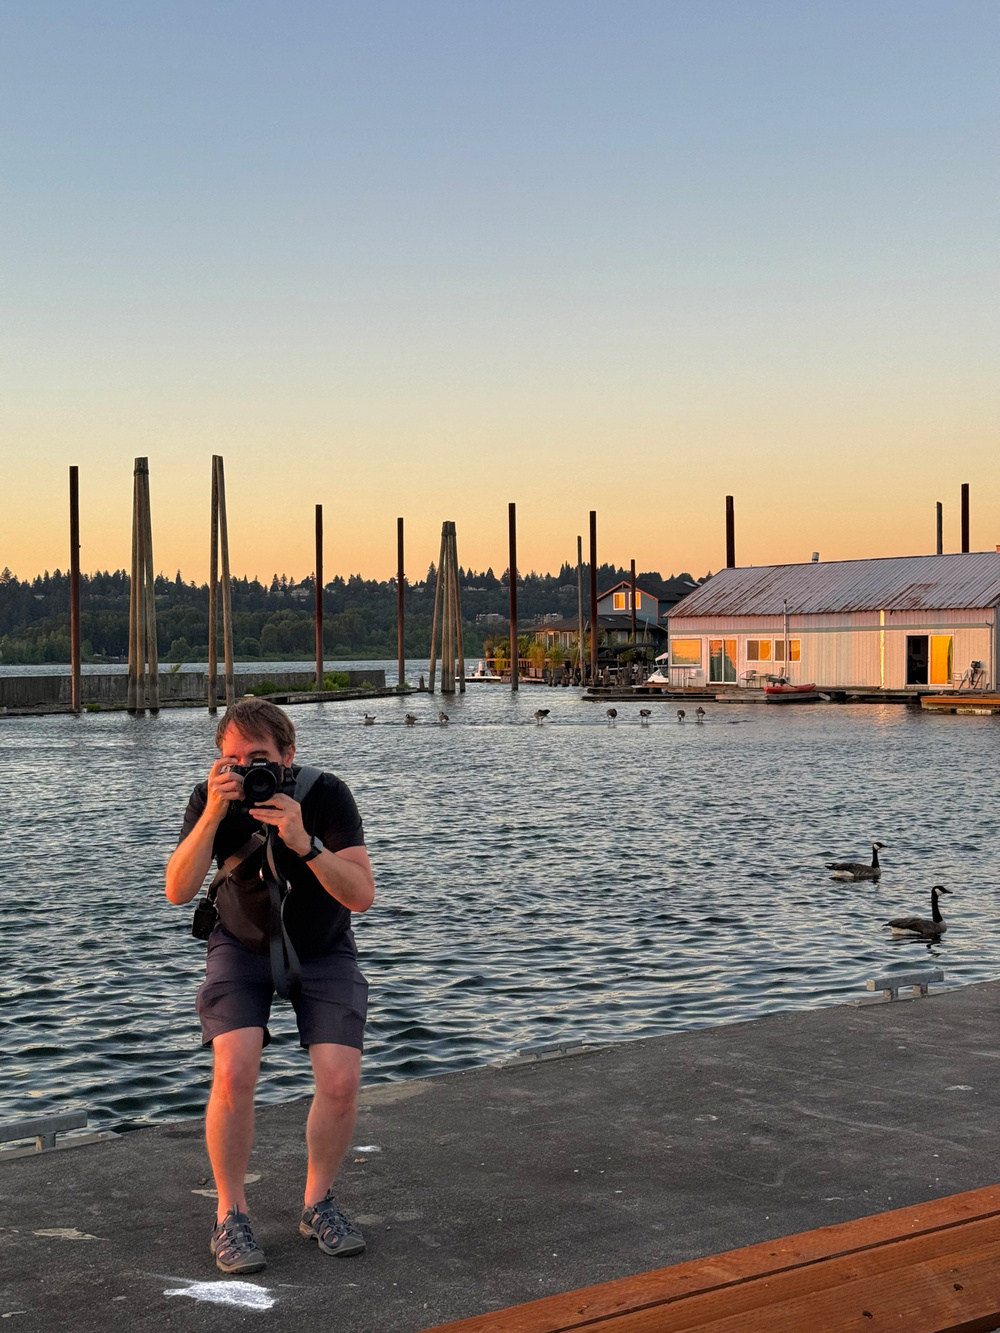 A person is crouched near a waterfront, taking a photo of the photographer. The background features a calm body of water, several geese, and a house with a tin roof. The sky is clear with a gradient from blue to orange during sunset.